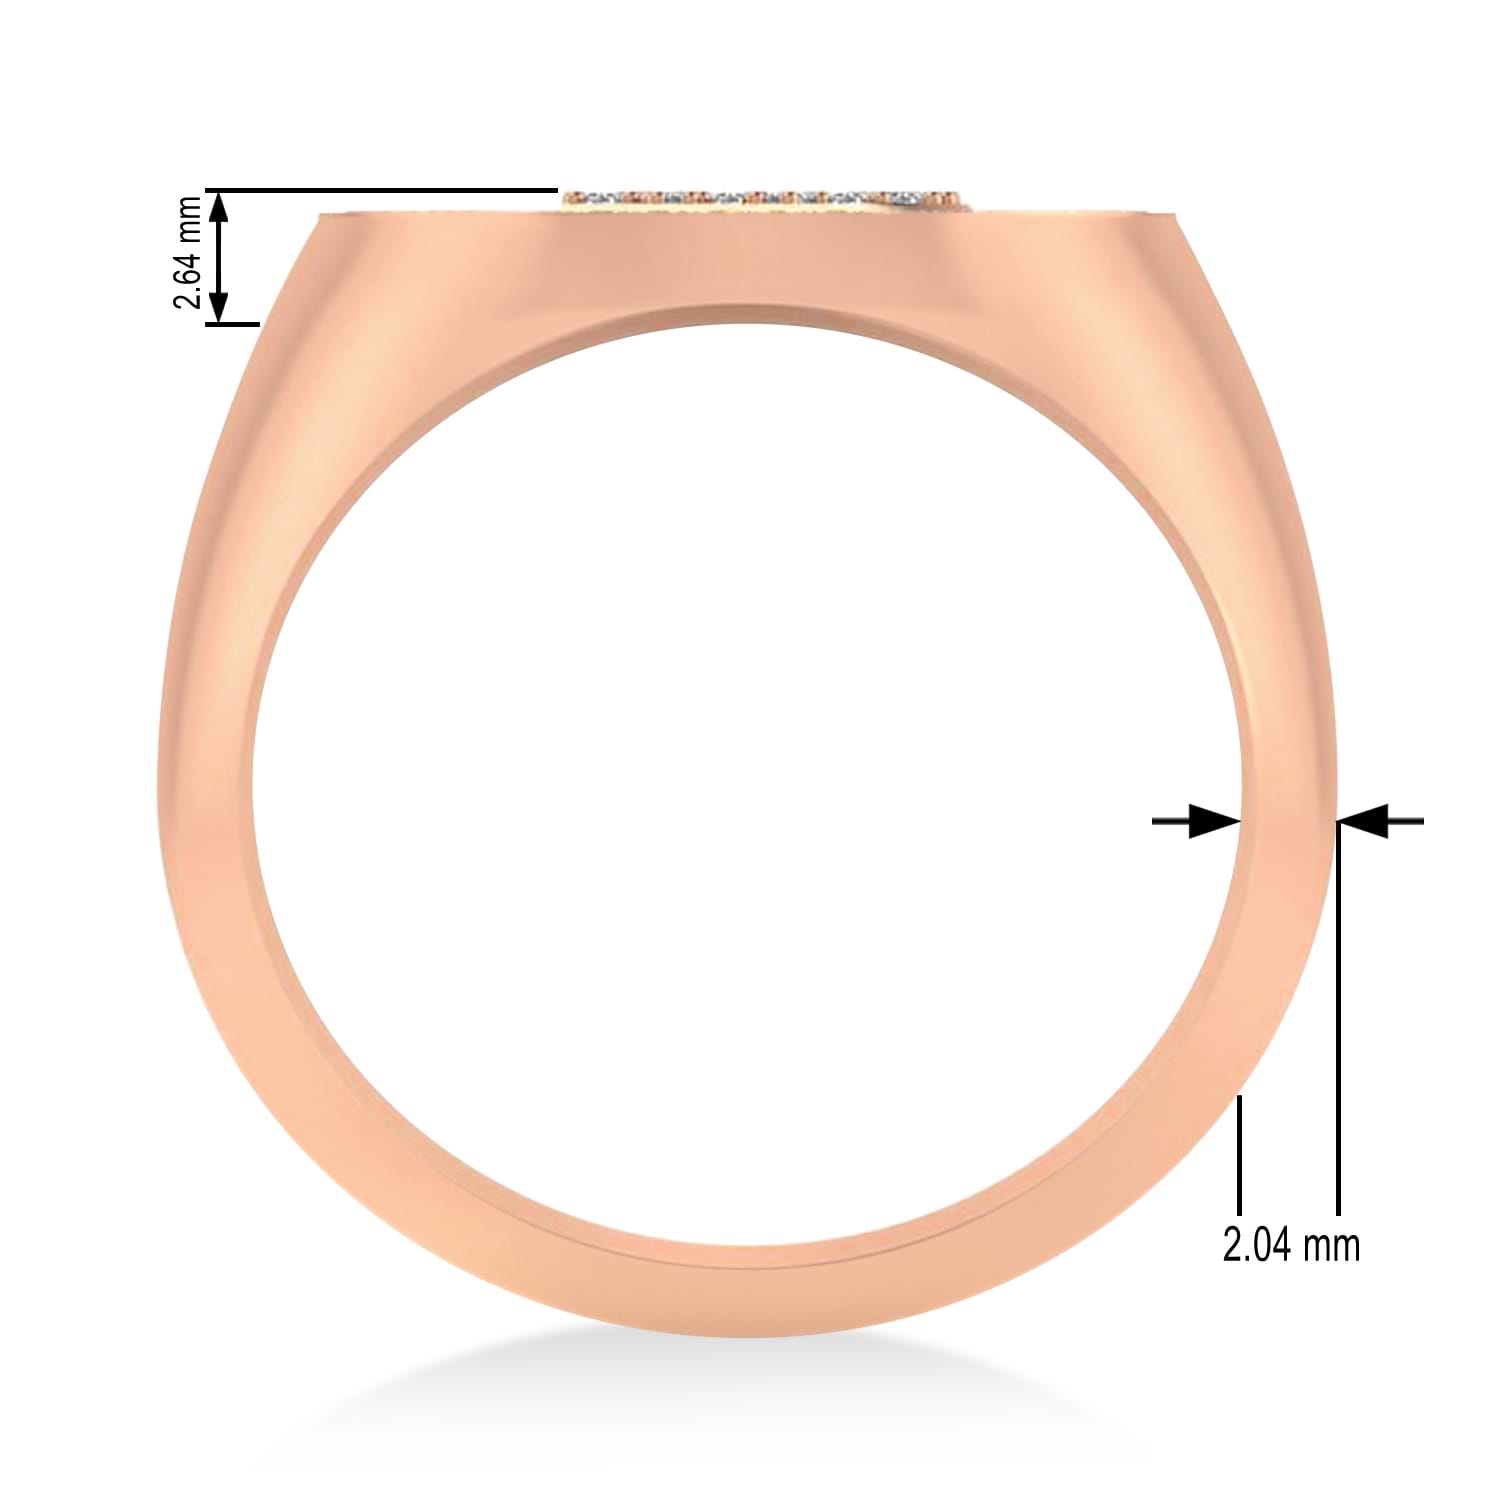 Diamond Cryptocurrency Bitcoin Men's Ring 14k Rose Gold (0.34ct)